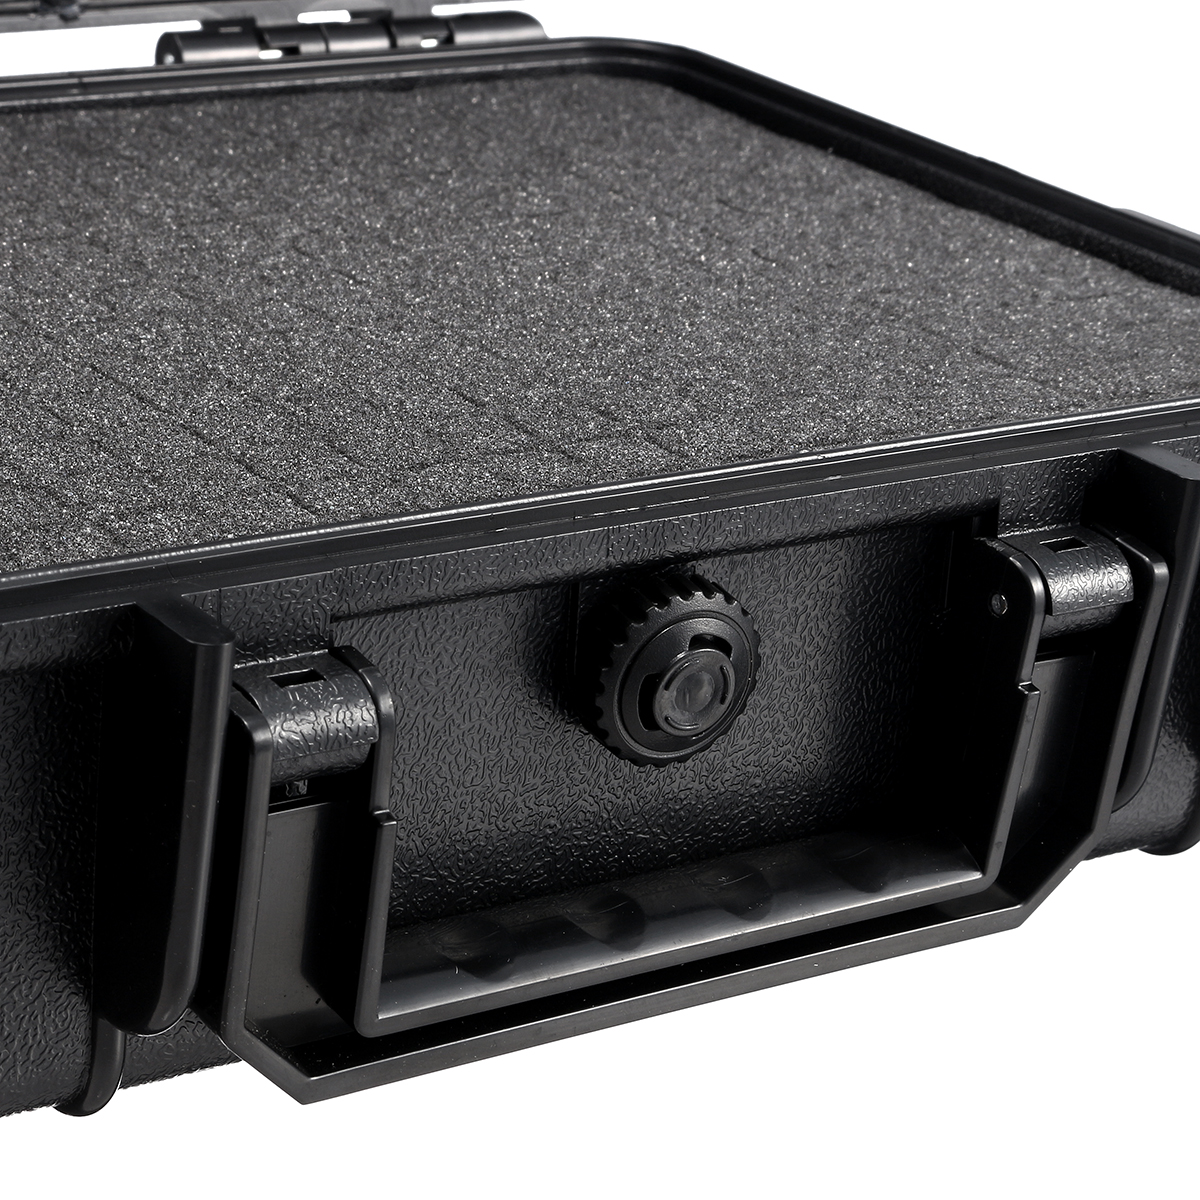 Waterproof-Hard-Carry-Tool-Case-Bag-Storage-Box-Camera-Photography-with-Sponge-18012050mm-1661734-7